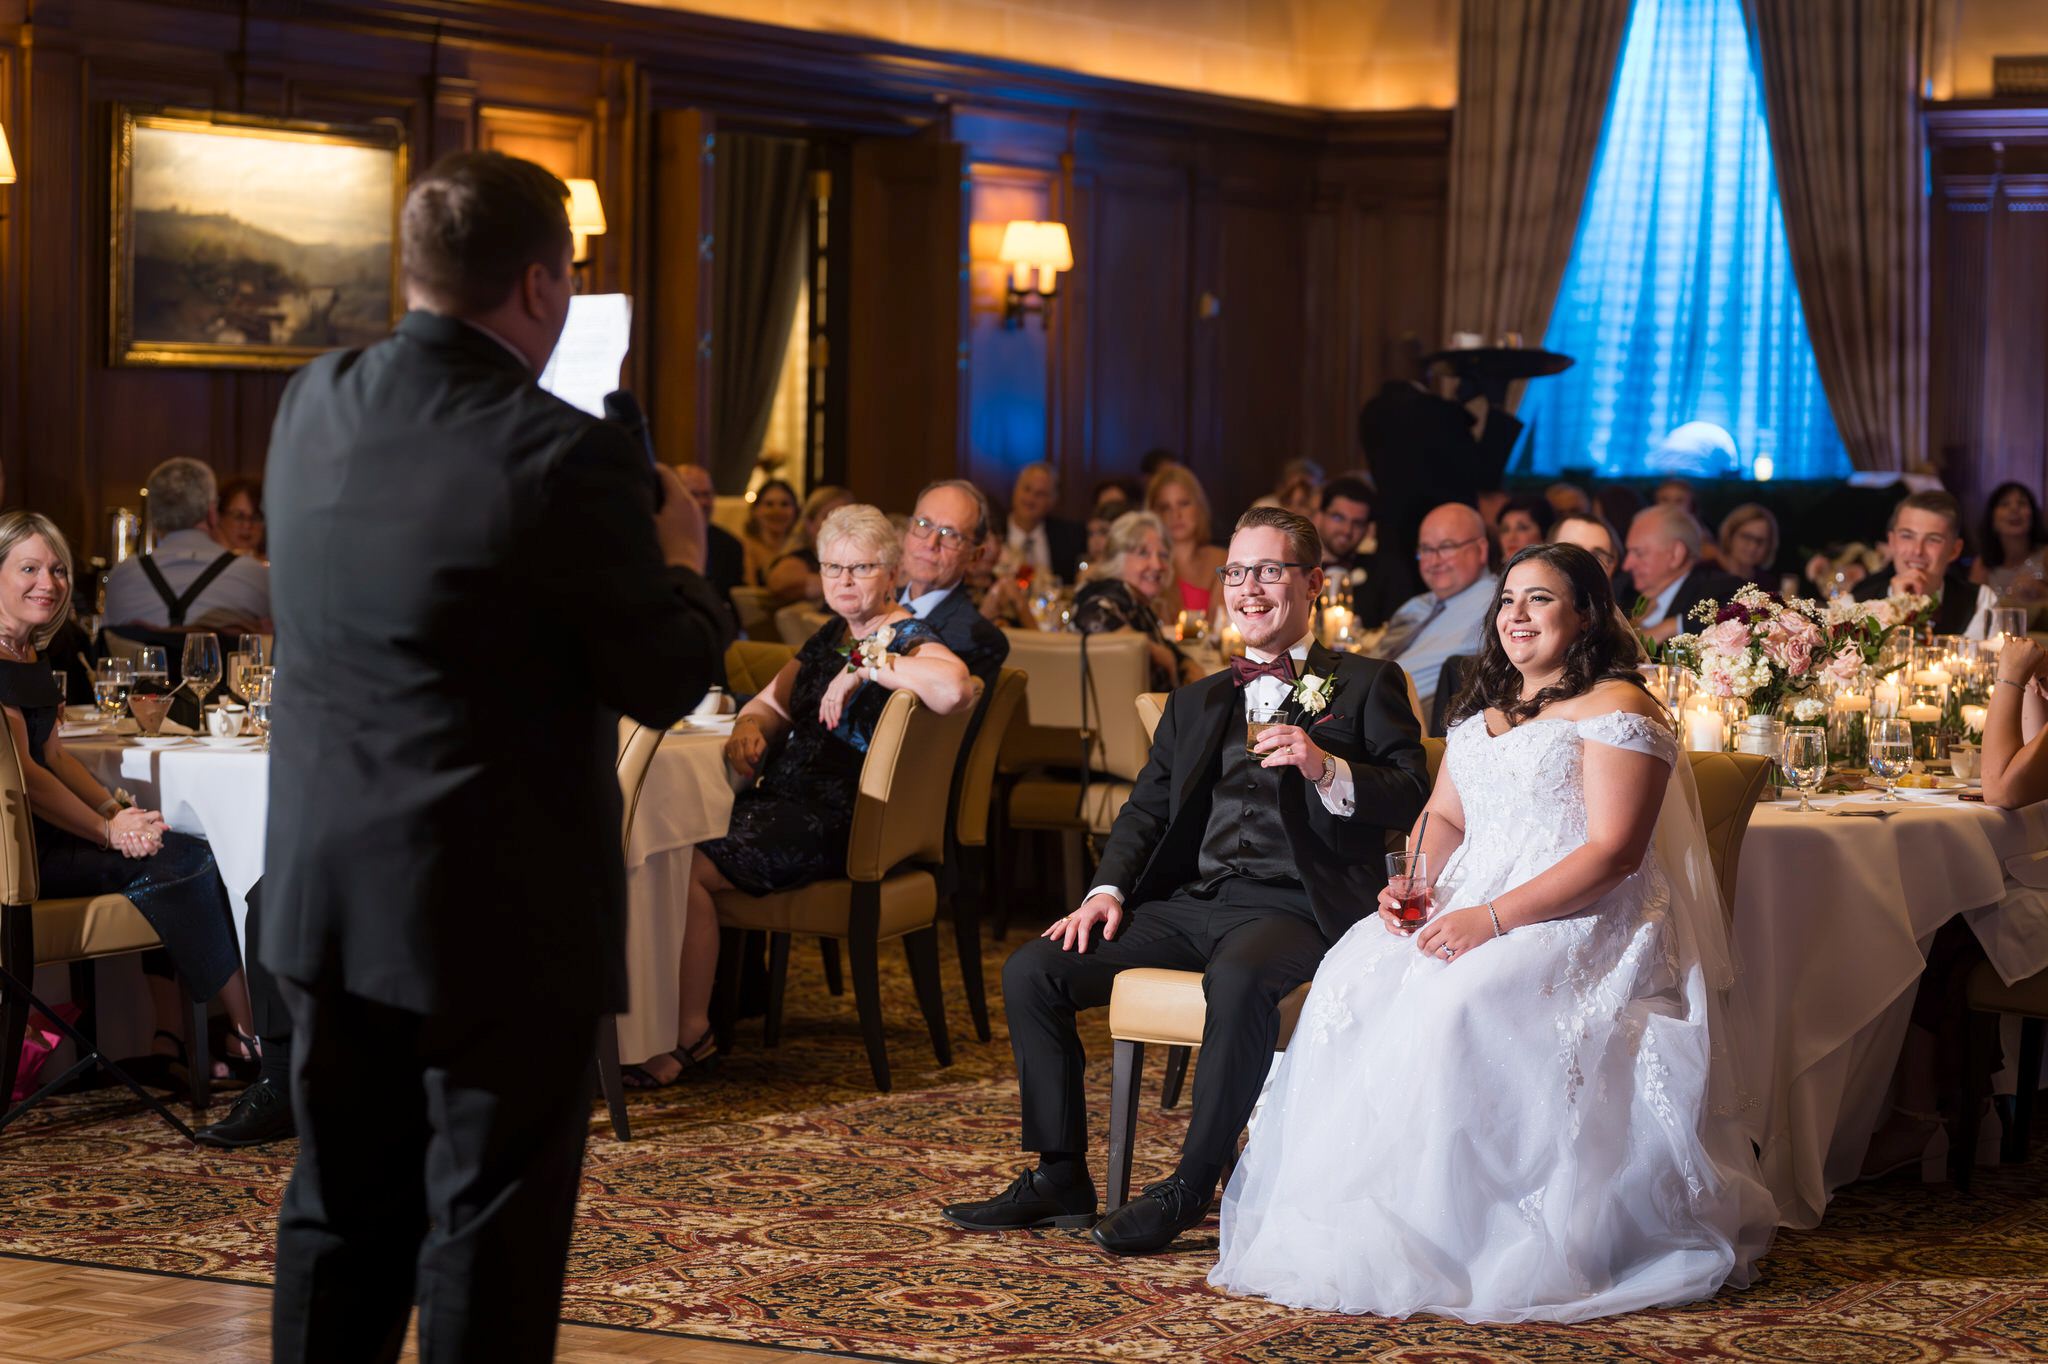 The best man toasts the bride and groom at a Detroit Athletic Club wedding.  